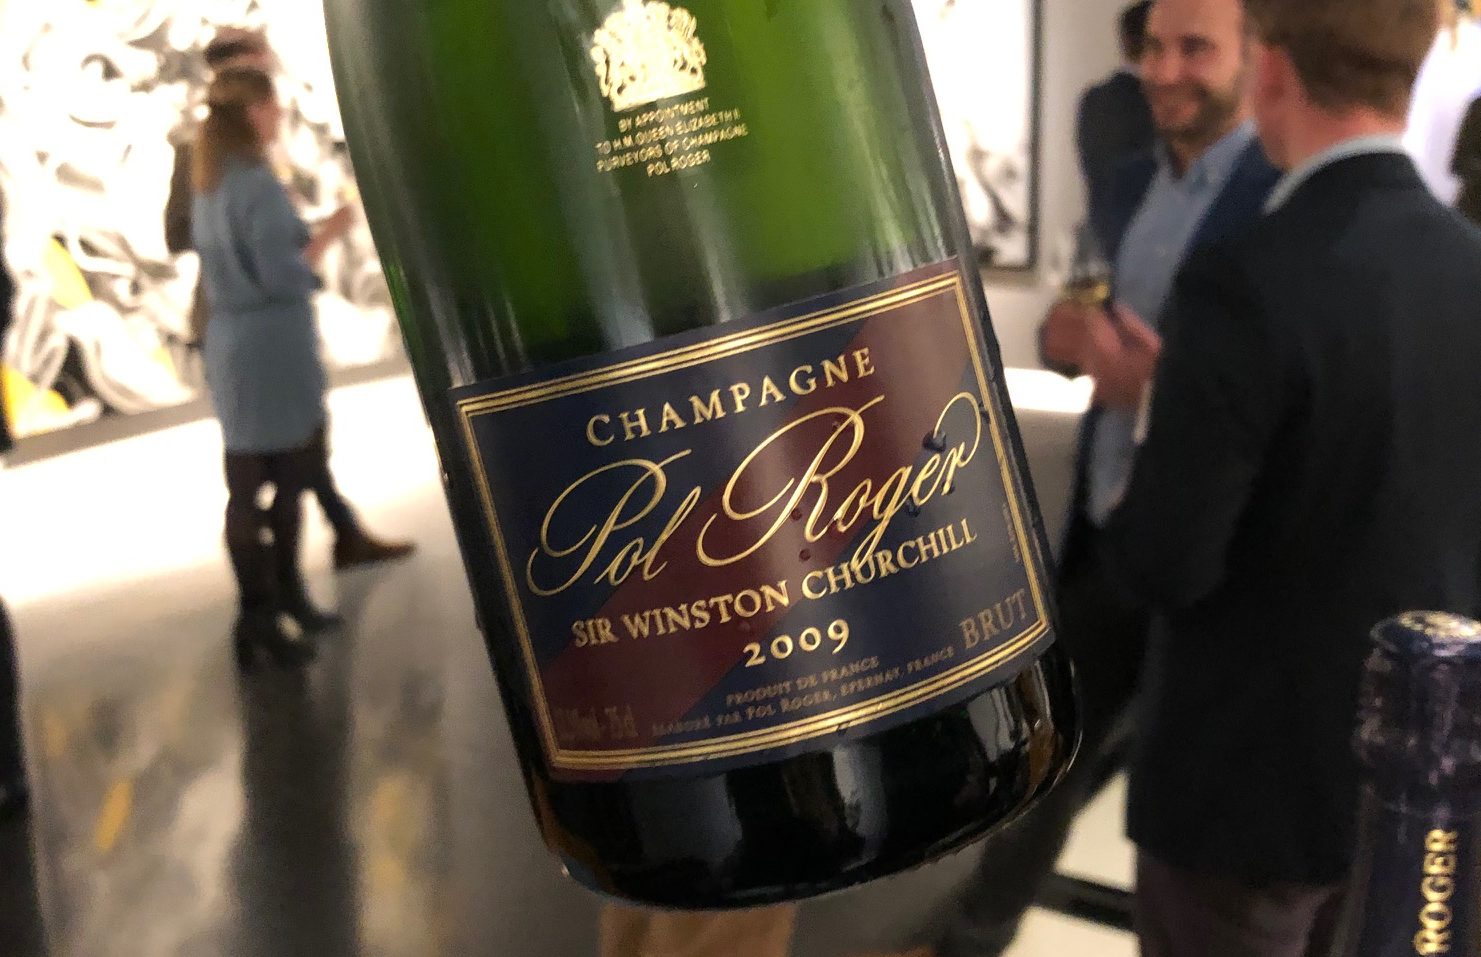 Why Pol Roger Winston Churchill 2009 is ‘Burgundy with bubbles’